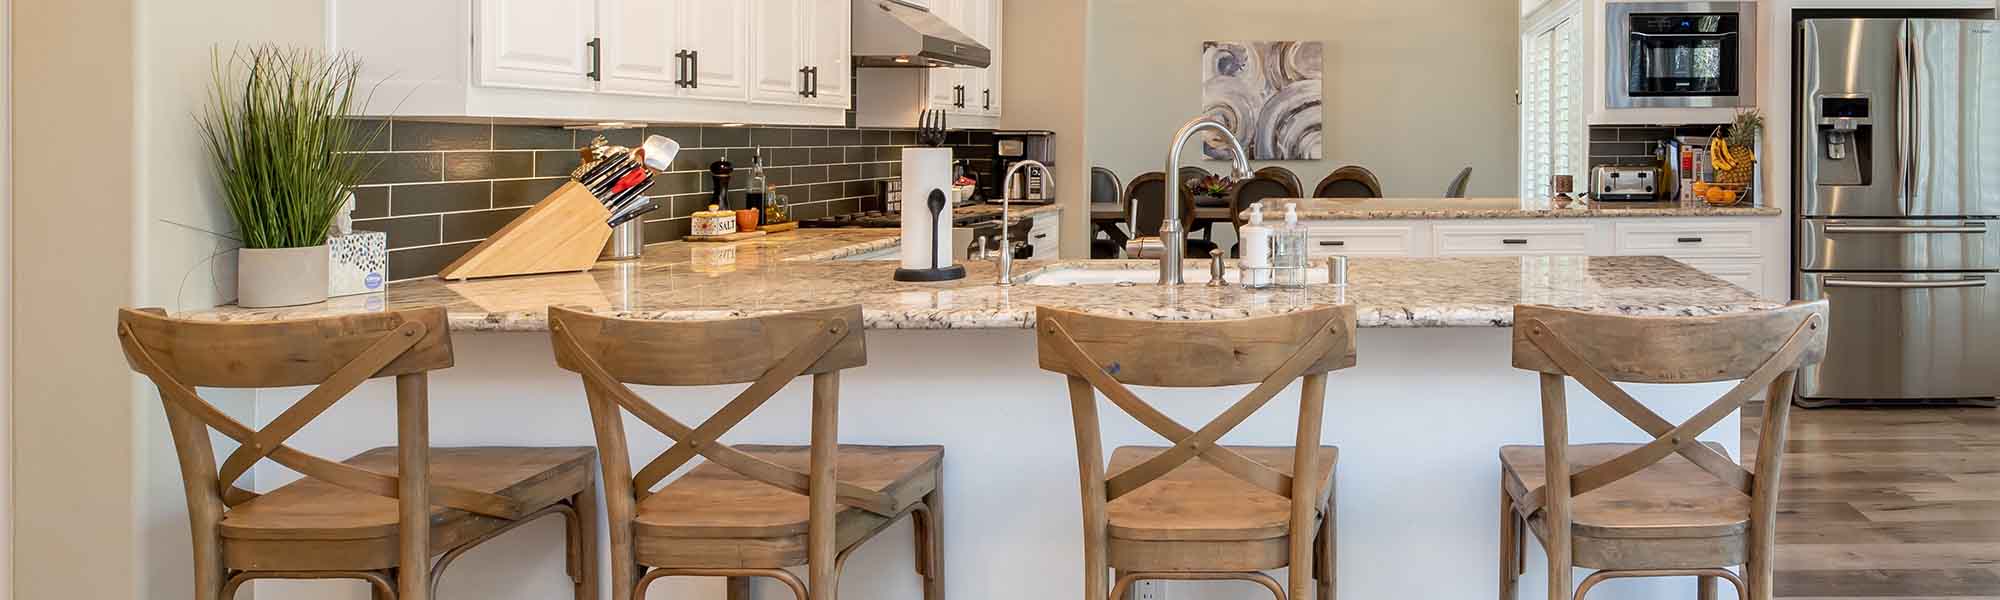 Kitchen accessories on the background of a bar counter with elegant bar stools